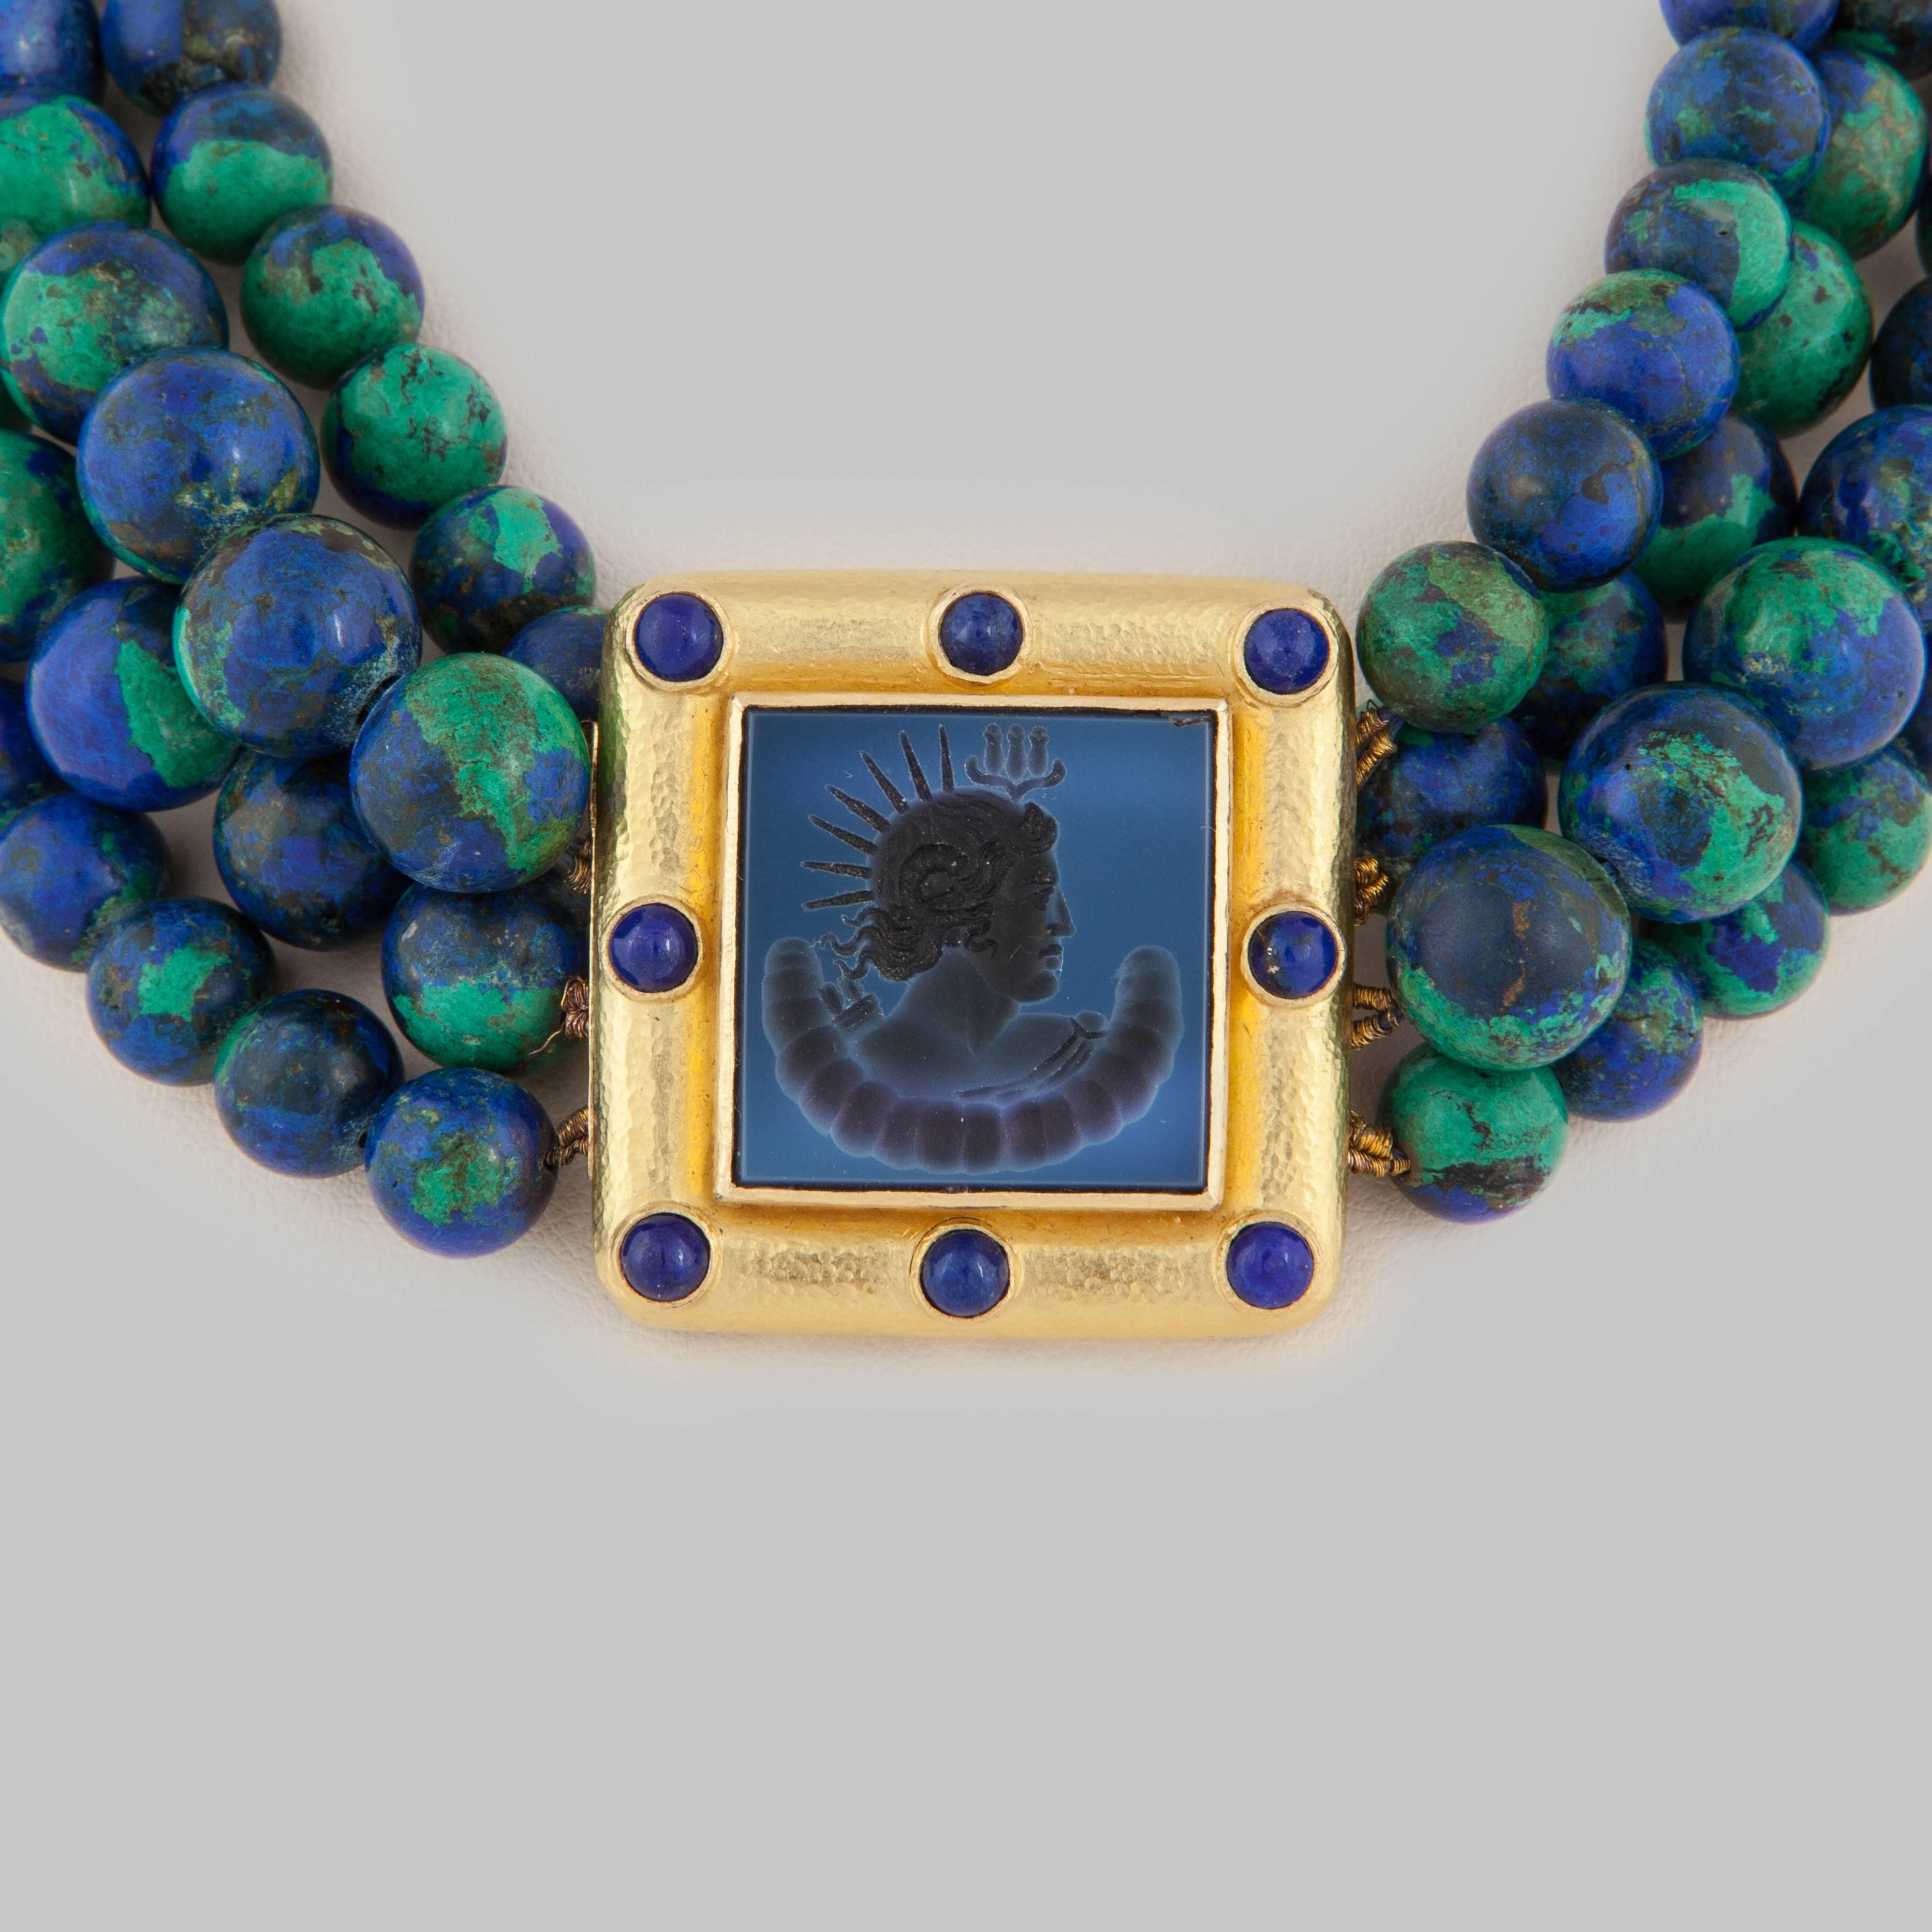 Elizabeth Locke multi-strand necklace consisting of 260 azurmalachite beads.  The necklace features a central plaque in 18K gold with eight cabochon lapis stones and a carved intaglio center.  Inside bead strand measures 14 inches; the plaque